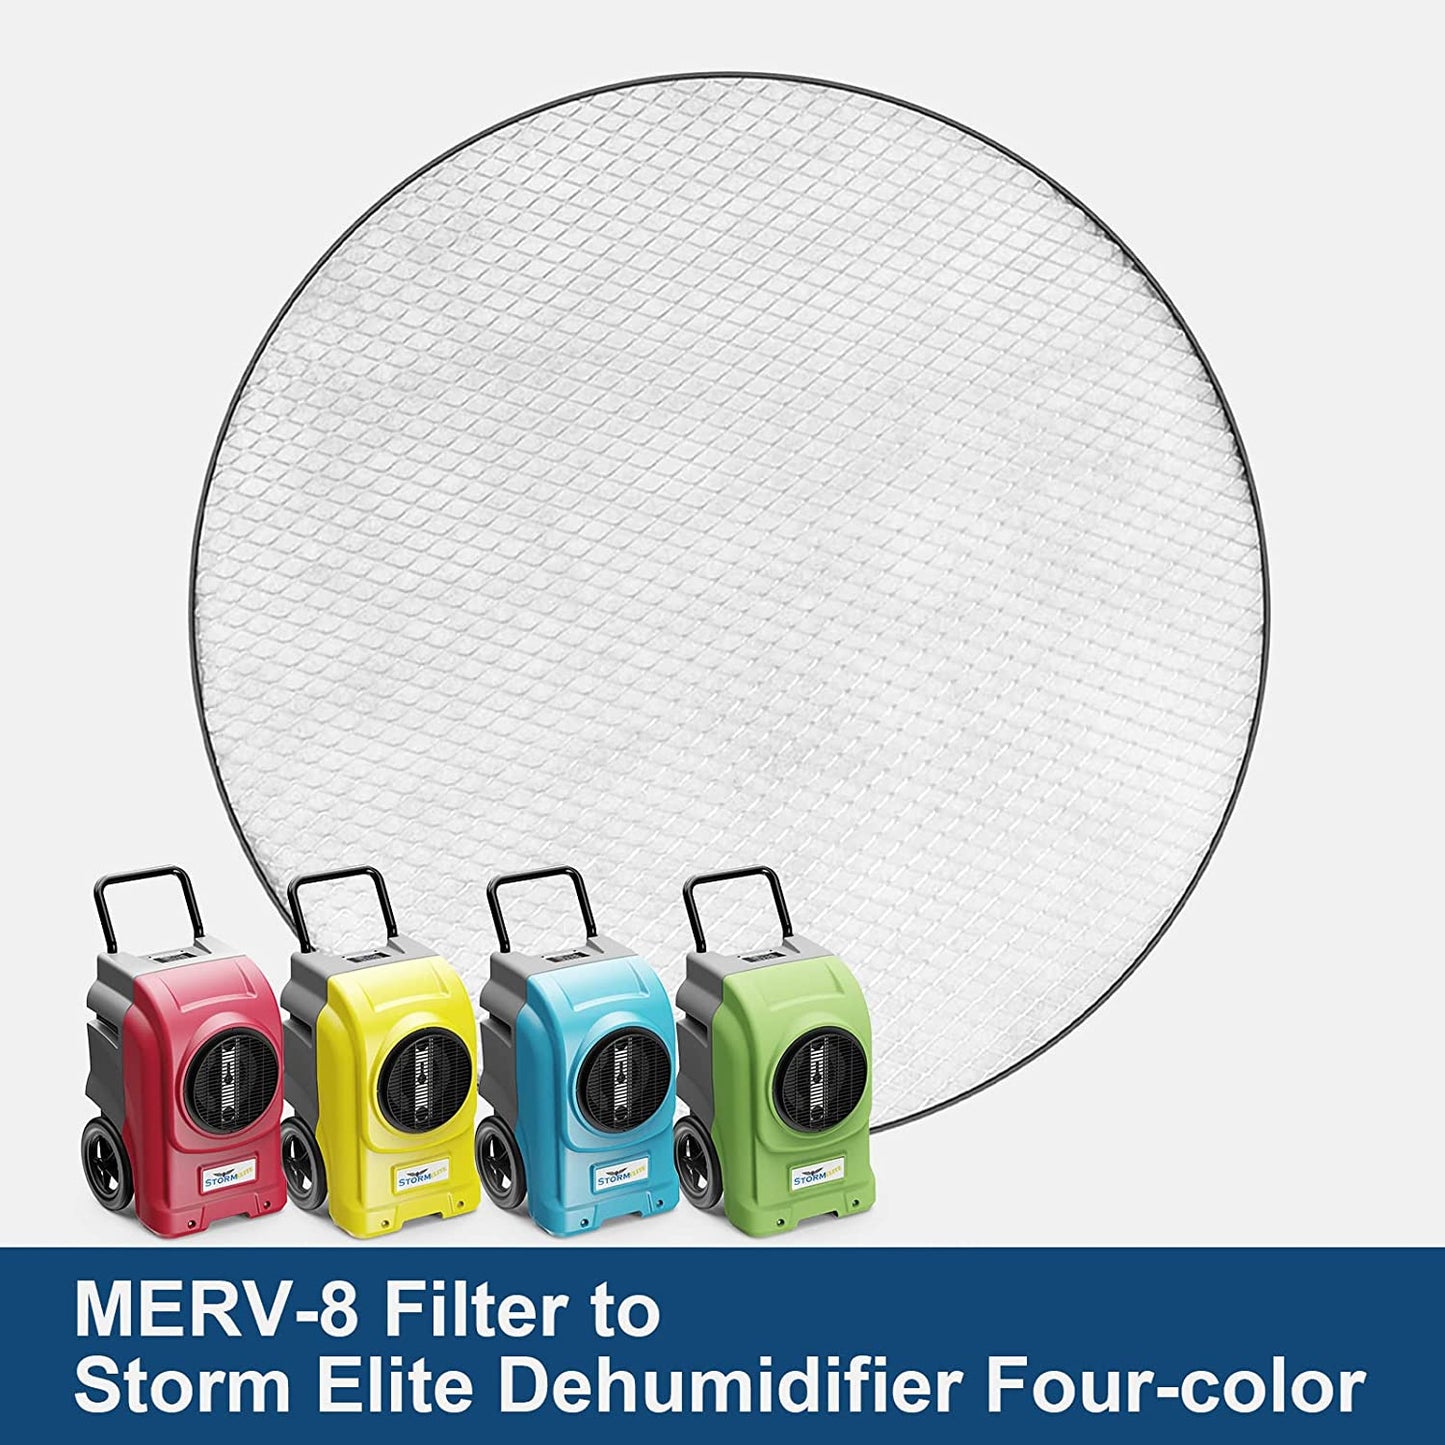 AlorAir® 3 Pack MERV-8 Filter for Commercial Dehumidifiers Storm Elite New Accessory, Round